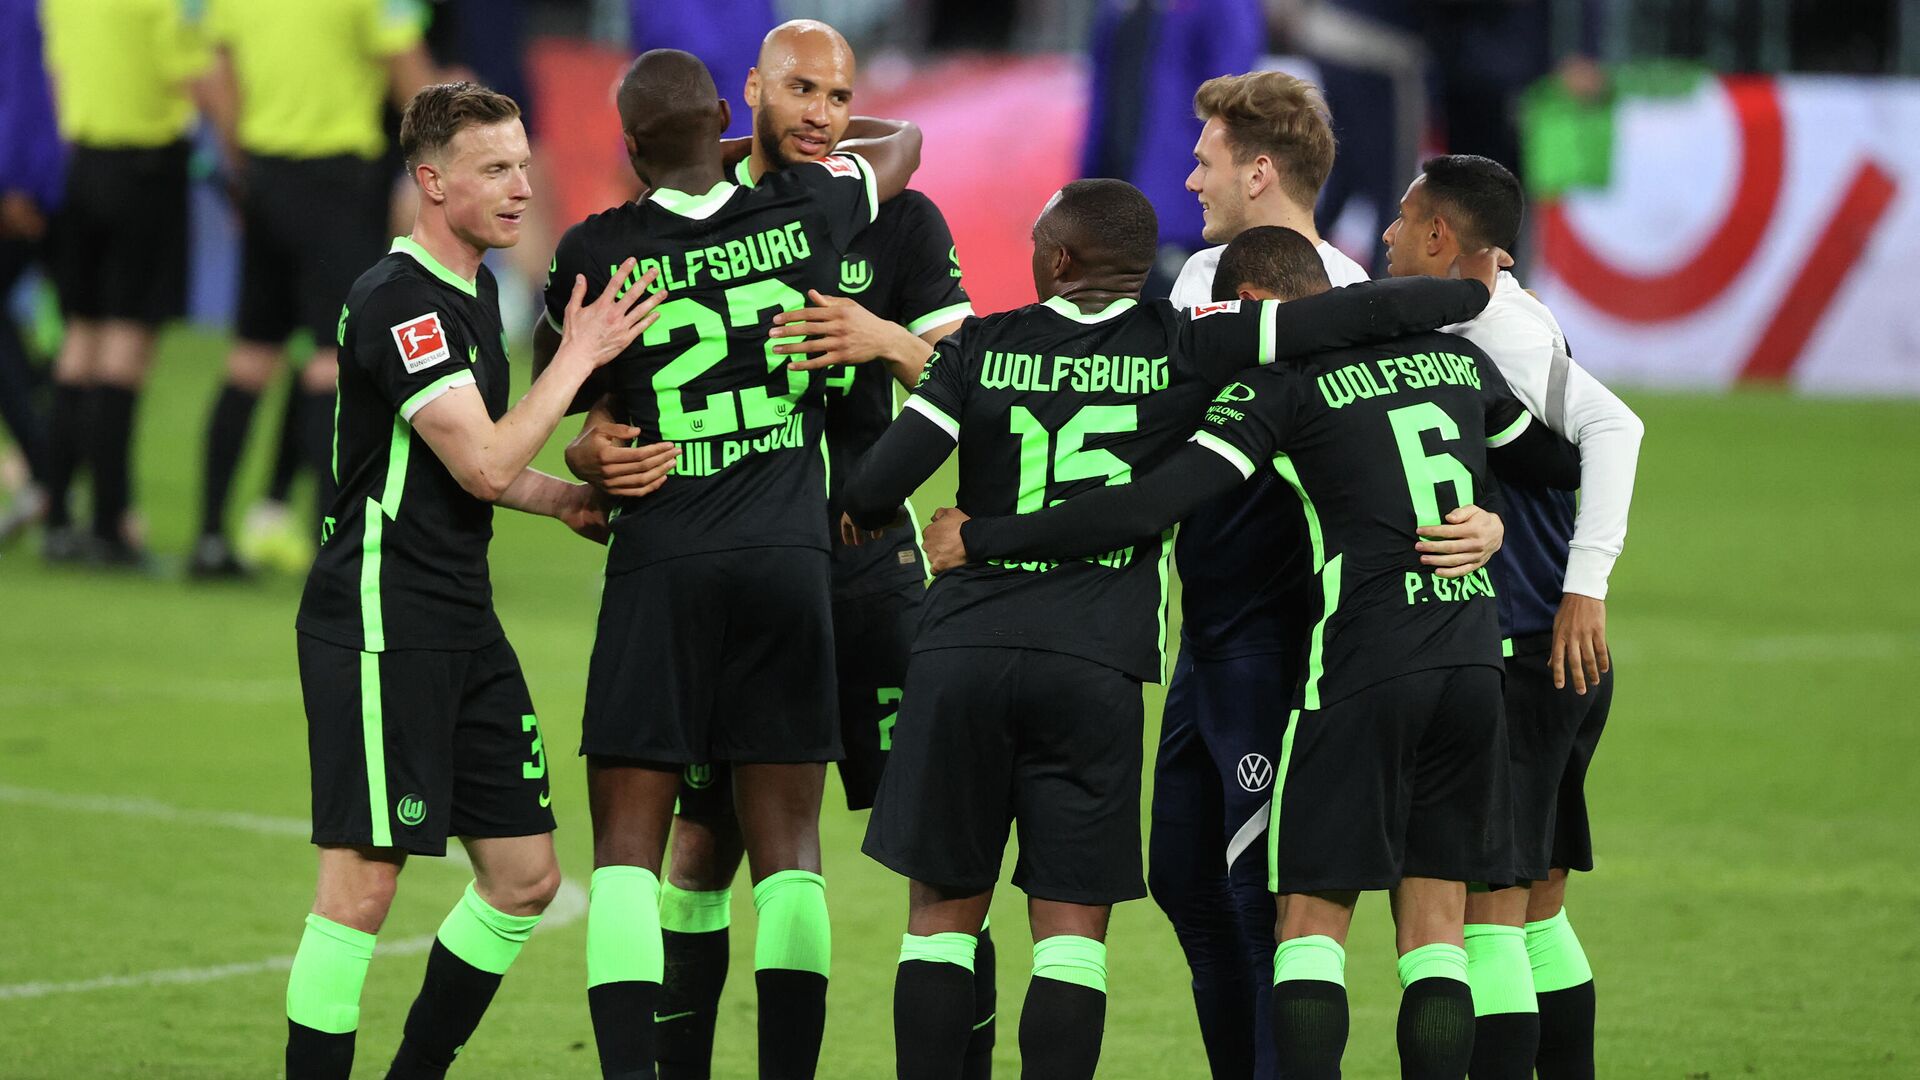 Wolfsburg players celebrate after the German first division Bundesliga football match RB Leipzig vs VfL Wolfsburg in Leipzig, on May 16, 2021. (Photo by Jan WOITAS / POOL / AFP) / DFL REGULATIONS PROHIBIT ANY USE OF PHOTOGRAPHS AS IMAGE SEQUENCES AND/OR QUASI-VIDEO - РИА Новости, 1920, 17.08.2021